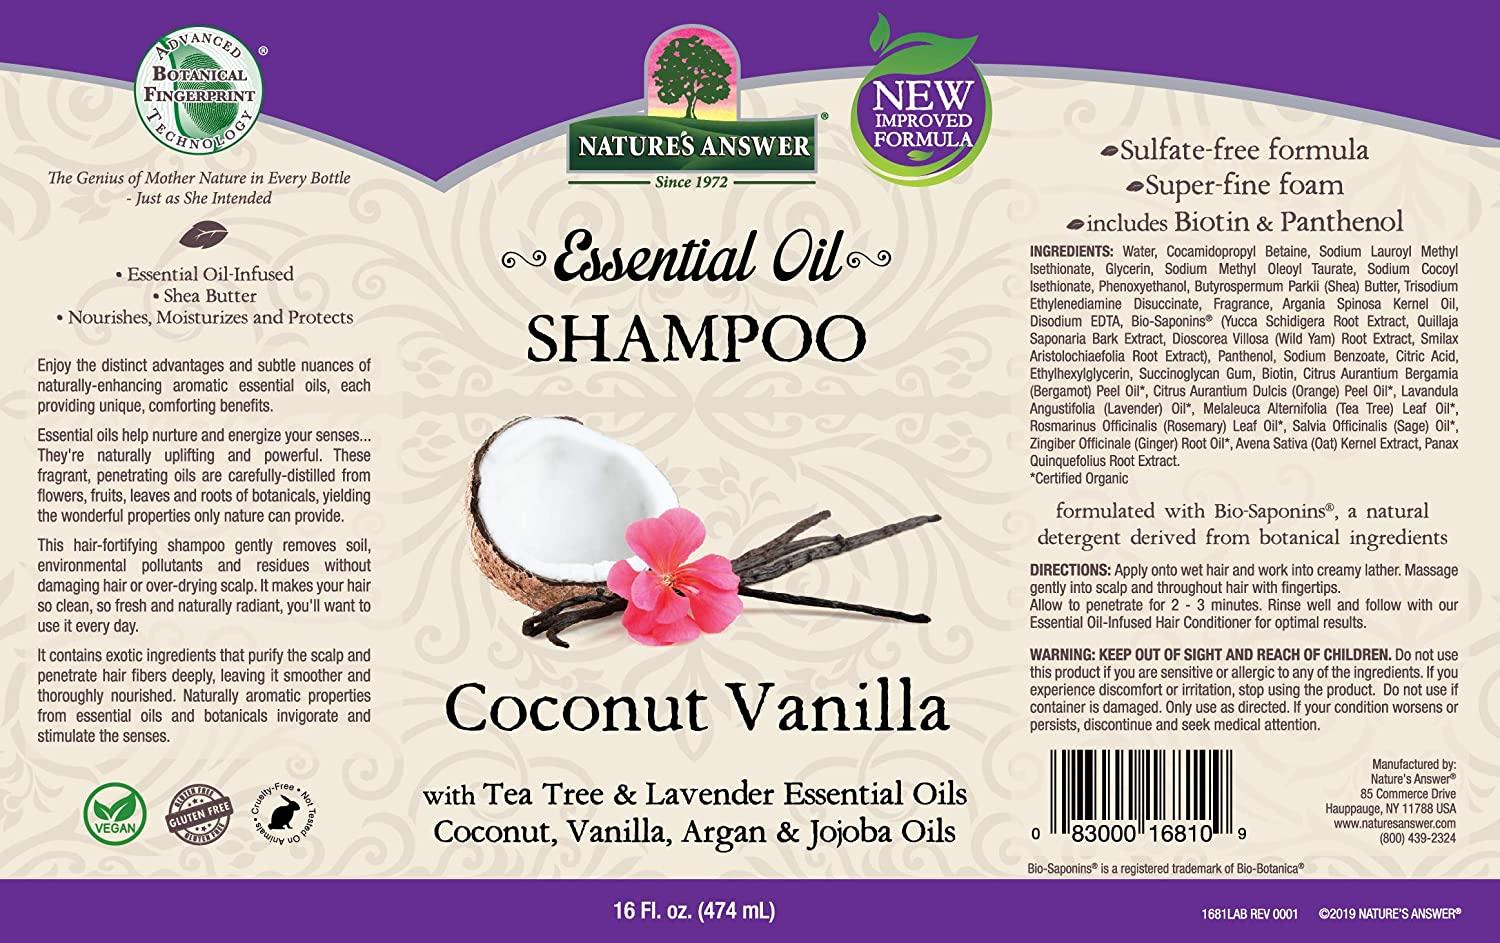 Benefits of Vanilla and Coconut Essential Oil